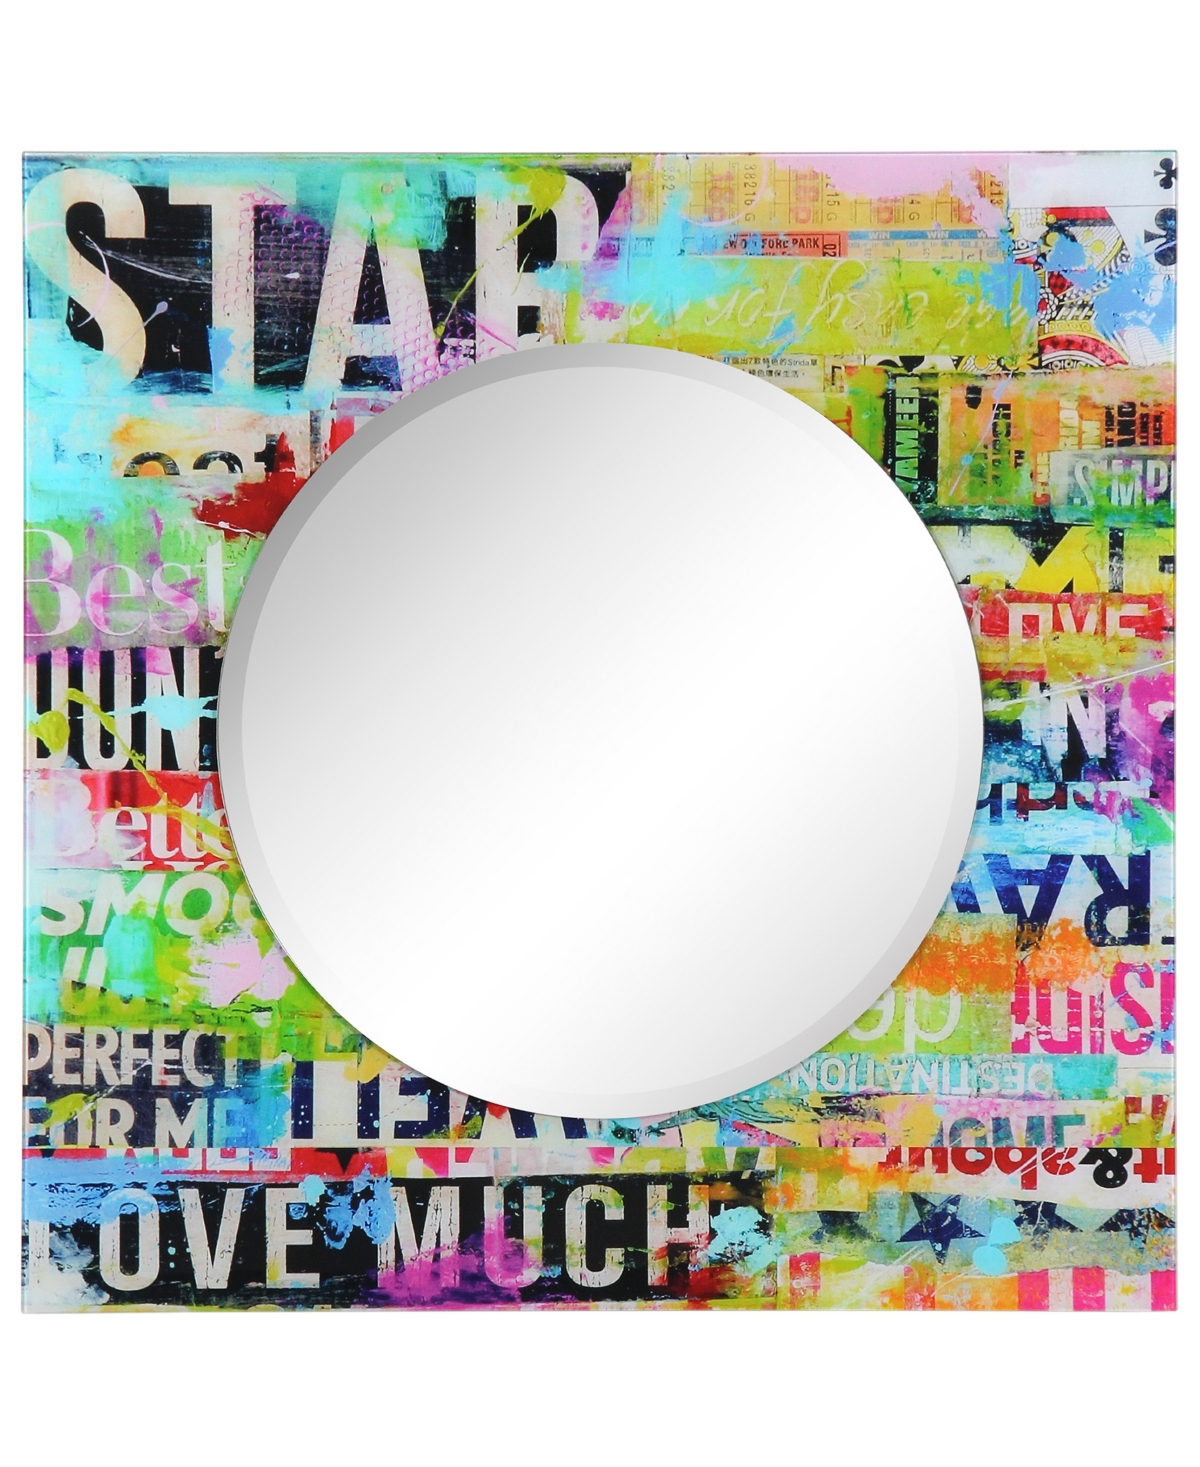 Reverse Printed Tempered Art Glass with Round Beveled Mirror Wall Decor 36" x 36" - Multi